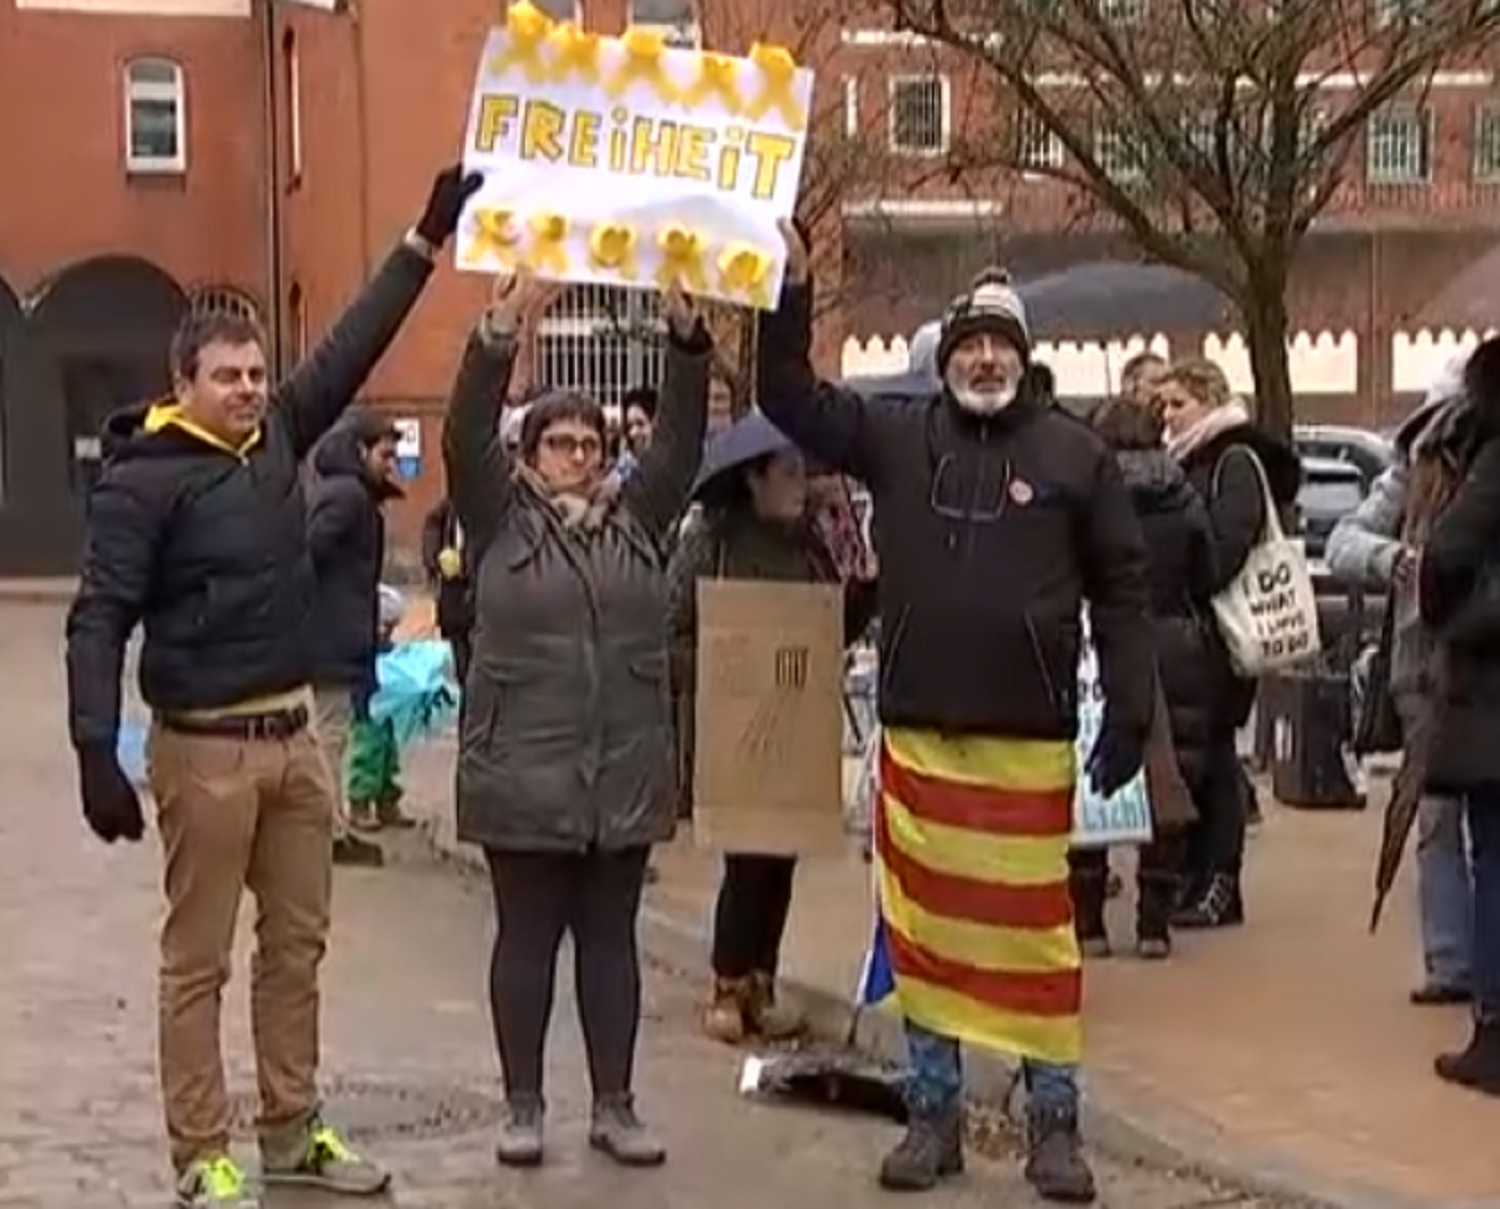 Demonstration in support of Puigdemont in front of Neumünster prison